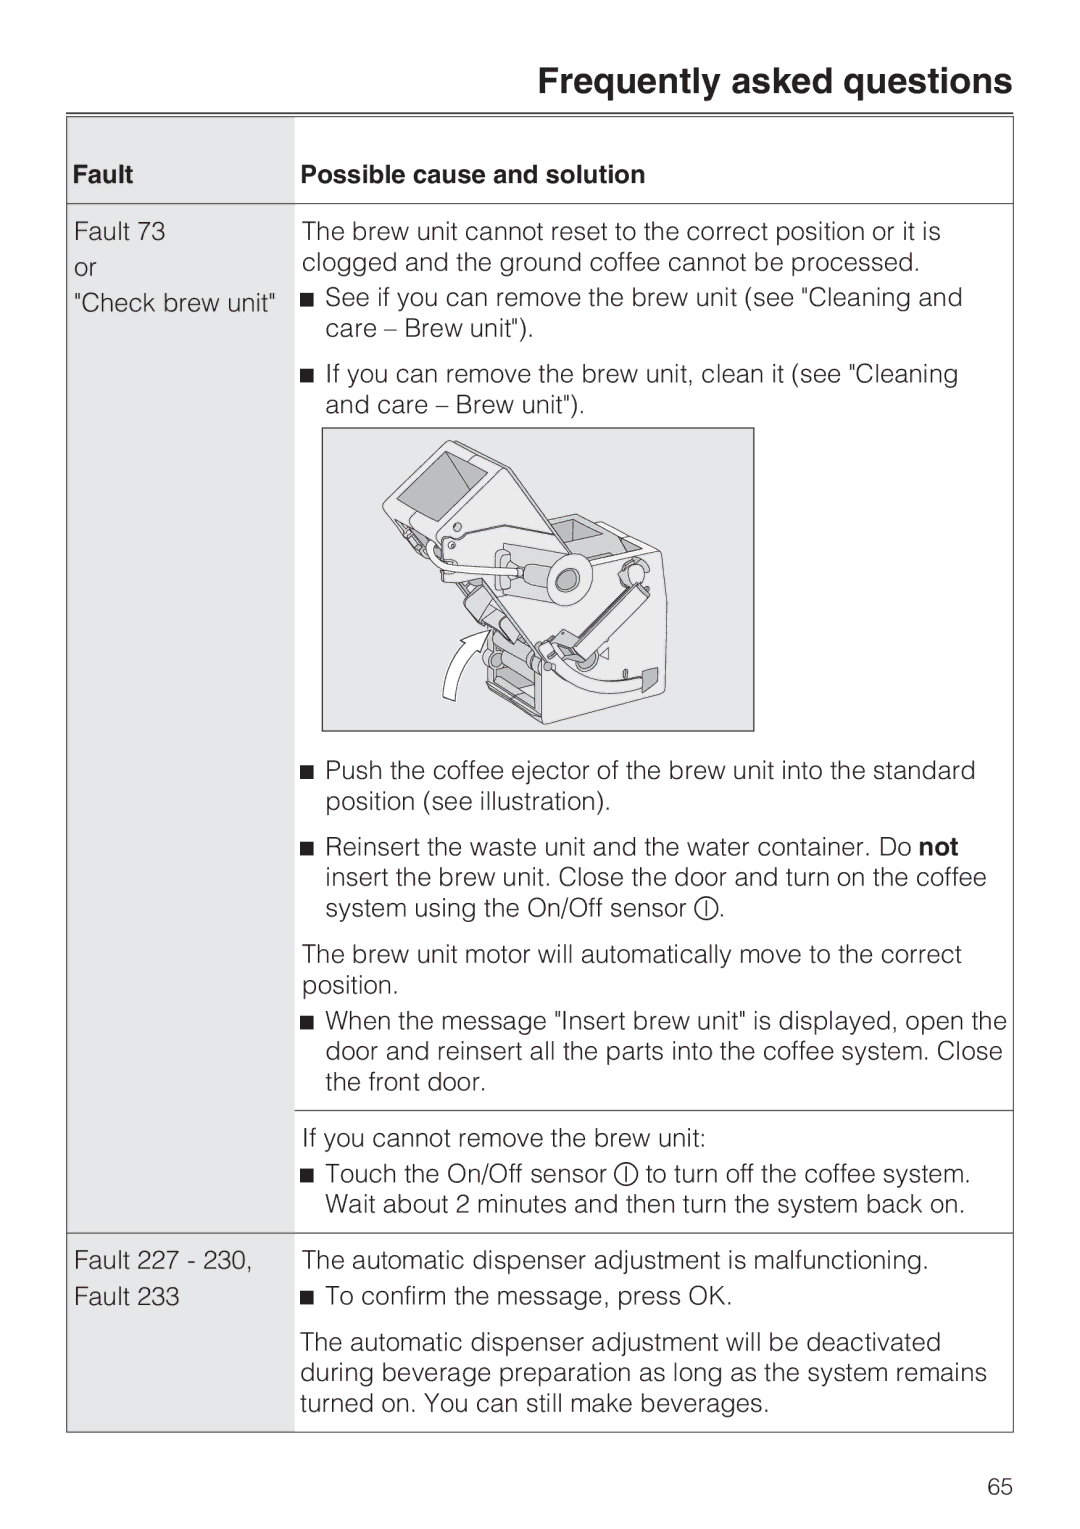 Miele 09 741 681 installation instructions Frequently asked questions 